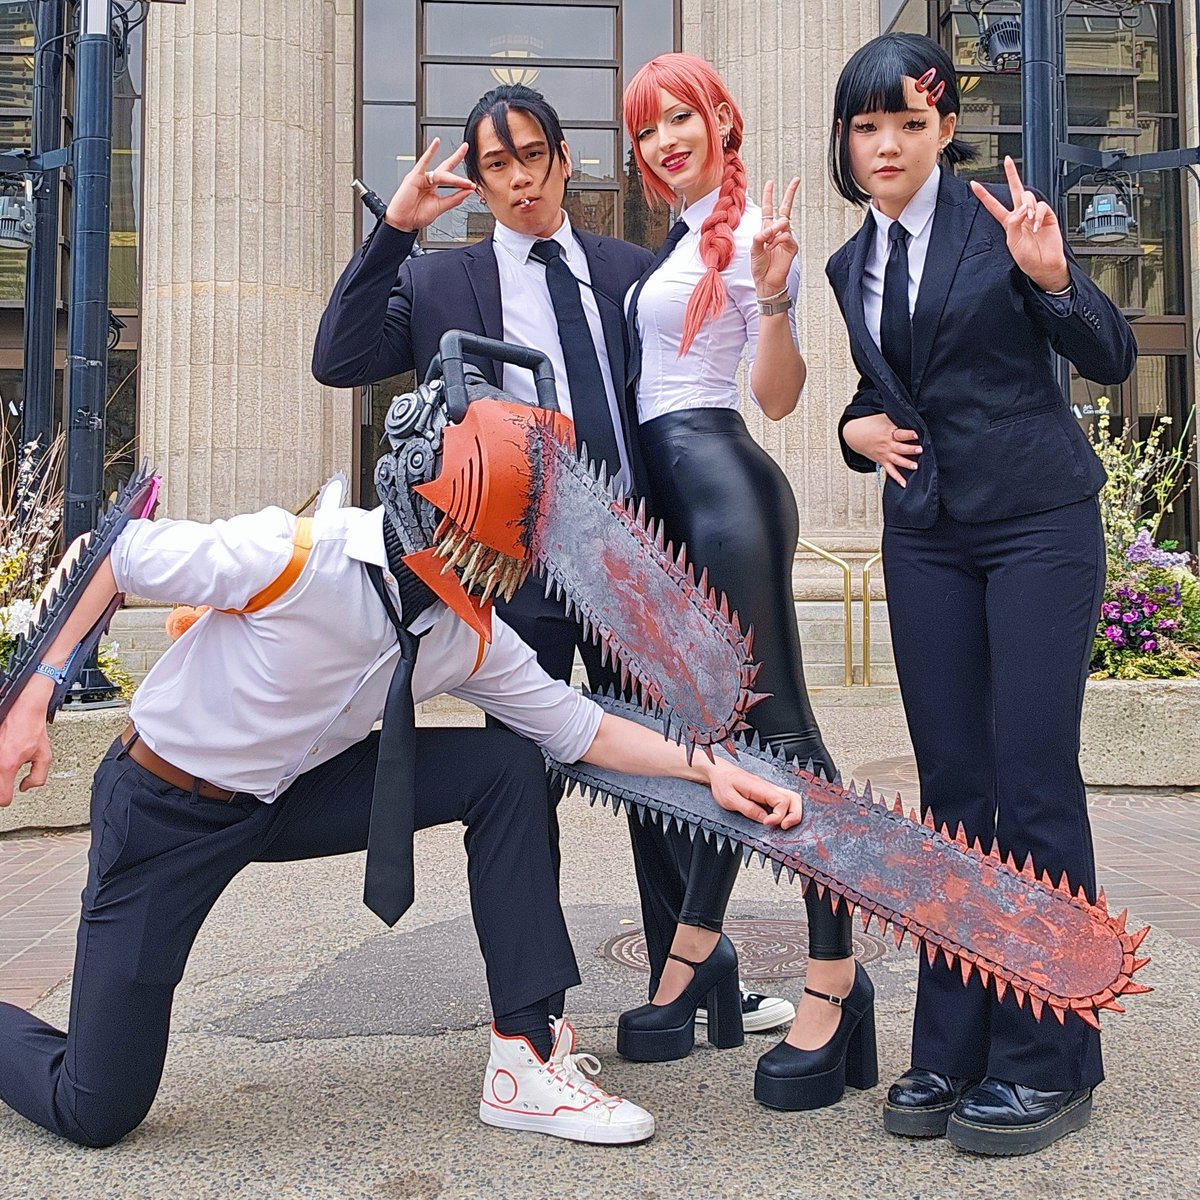 Chainsawman cosplay with friends 🥰